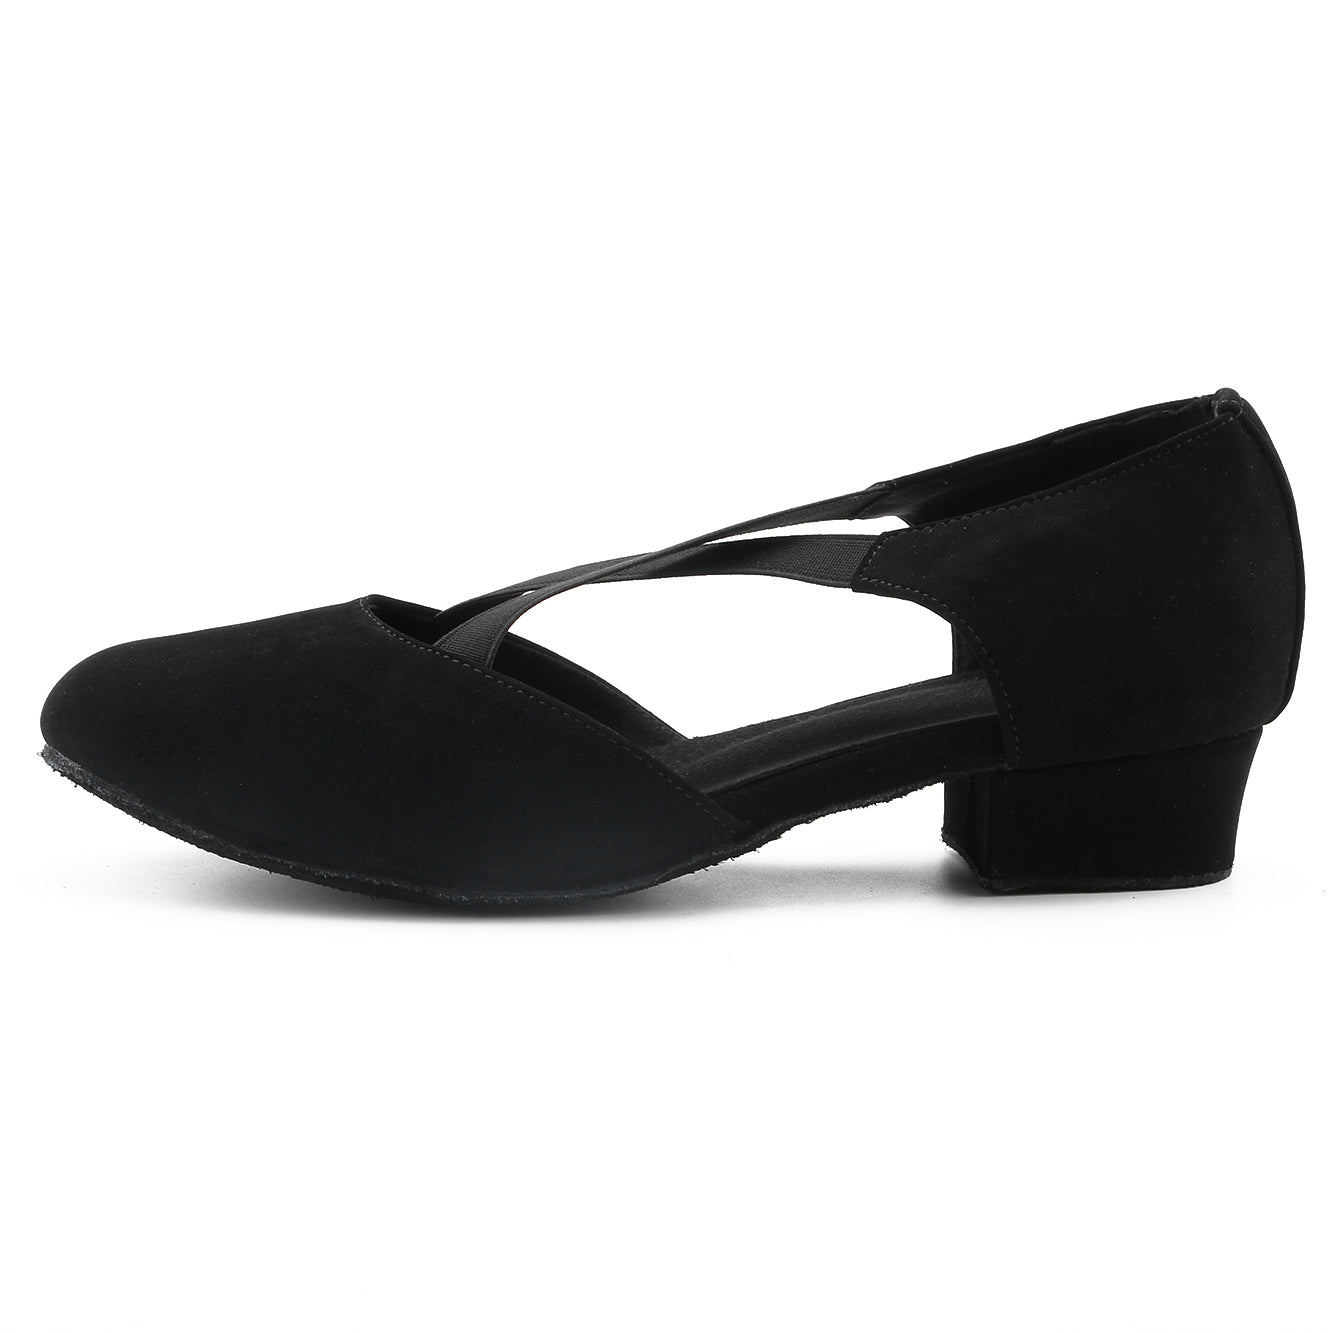 Ladies black low heel ballroom dancing shoes with suede sole for tango latin practice, closed-toe design (PD7307B)5